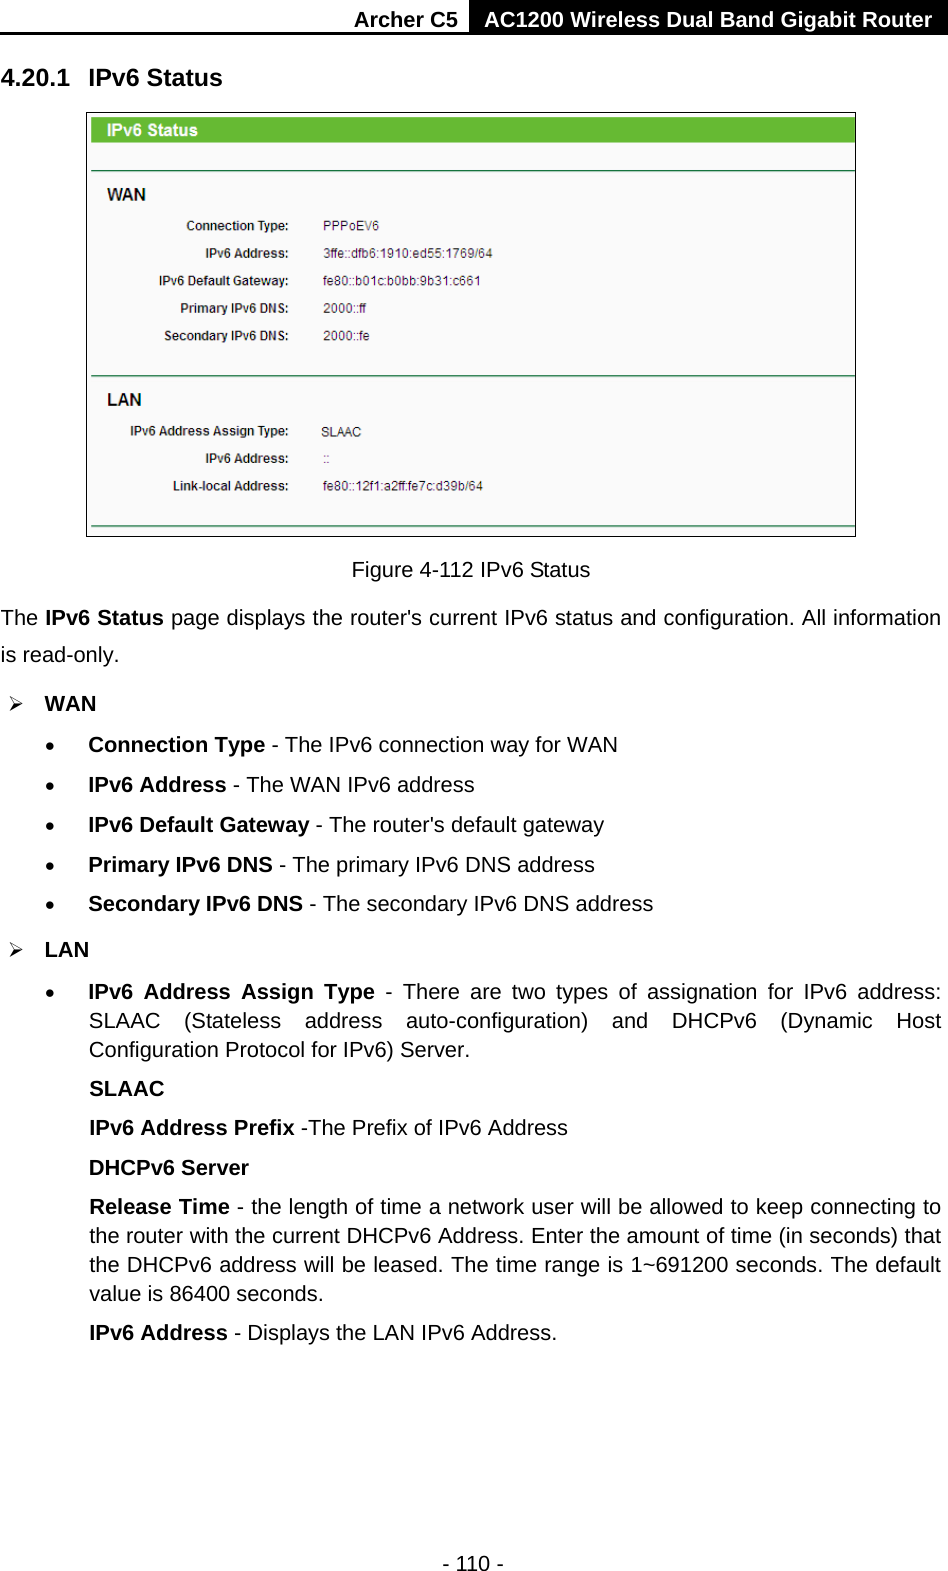 Archer C5 AC1200 Wireless Dual Band Gigabit Router  - 110 - 4.20.1 IPv6 Status  Figure 4-112 IPv6 Status The IPv6 Status page displays the router&apos;s current IPv6 status and configuration. All information is read-only.    WAN   • Connection Type - The IPv6 connection way for WAN • IPv6 Address - The WAN IPv6 address • IPv6 Default Gateway - The router&apos;s default gateway • Primary IPv6 DNS - The primary IPv6 DNS address • Secondary IPv6 DNS - The secondary IPv6 DNS address  LAN • IPv6 Address Assign Type  -  There are two types of assignation for IPv6 address: SLAAC (Stateless address auto-configuration) and DHCPv6 (Dynamic Host Configuration Protocol for IPv6) Server. SLAAC IPv6 Address Prefix -The Prefix of IPv6 Address DHCPv6 Server Release Time - the length of time a network user will be allowed to keep connecting to the router with the current DHCPv6 Address. Enter the amount of time (in seconds) that the DHCPv6 address will be leased. The time range is 1~691200 seconds. The default value is 86400 seconds. IPv6 Address - Displays the LAN IPv6 Address. 